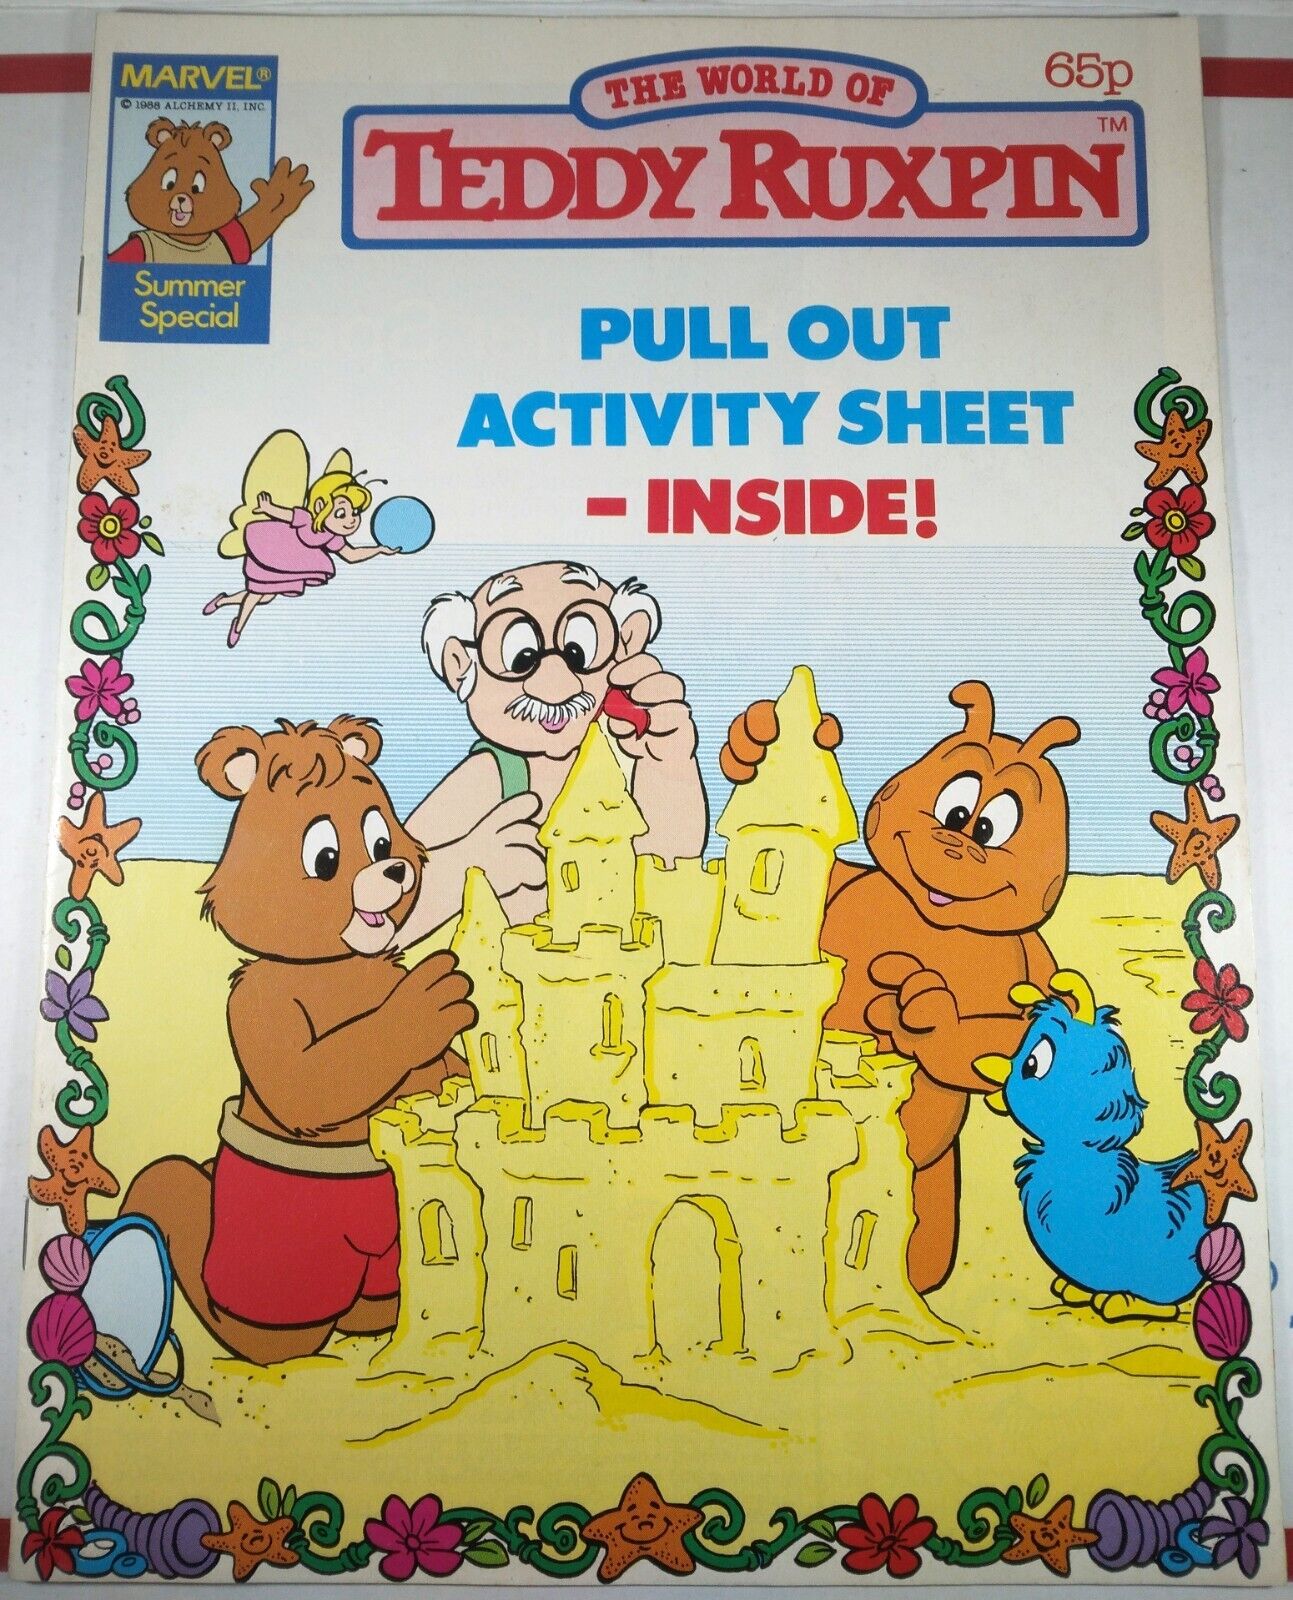 ☀️🐻 THE WORLD OF TEDDY RUXPIN SUMMER SPECIAL #1 MARVEL UK 1988 EXTREMELY RARE